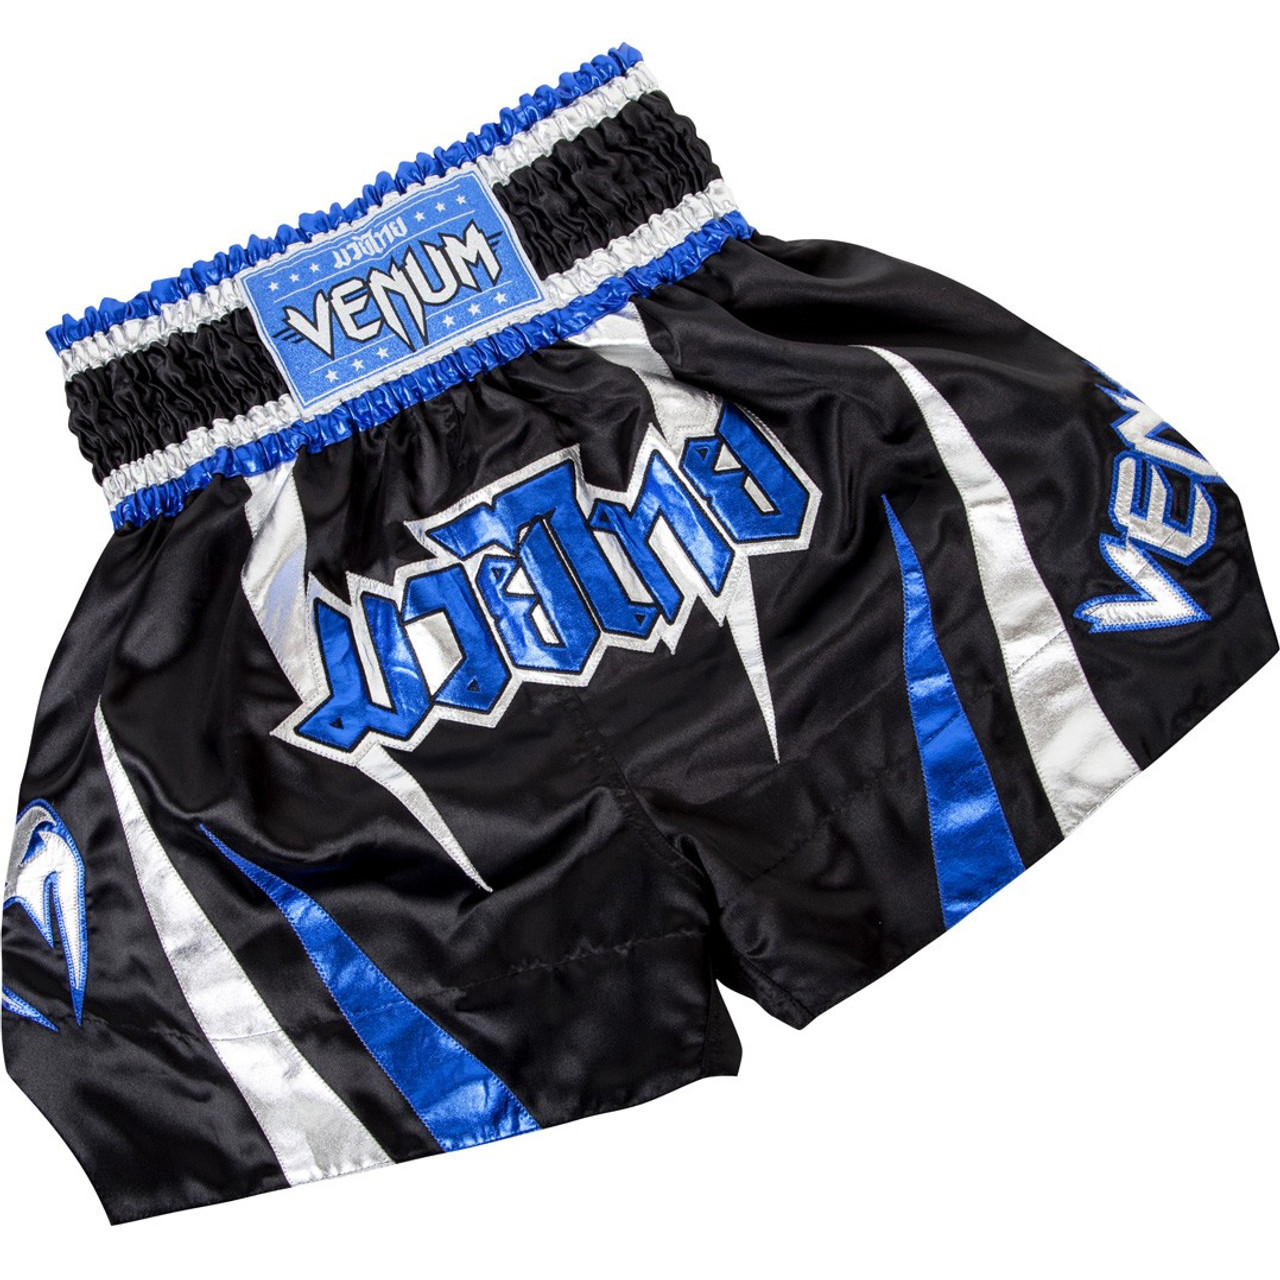 Venum - The Tecmo Muay Thai Shorts are now available worldwide